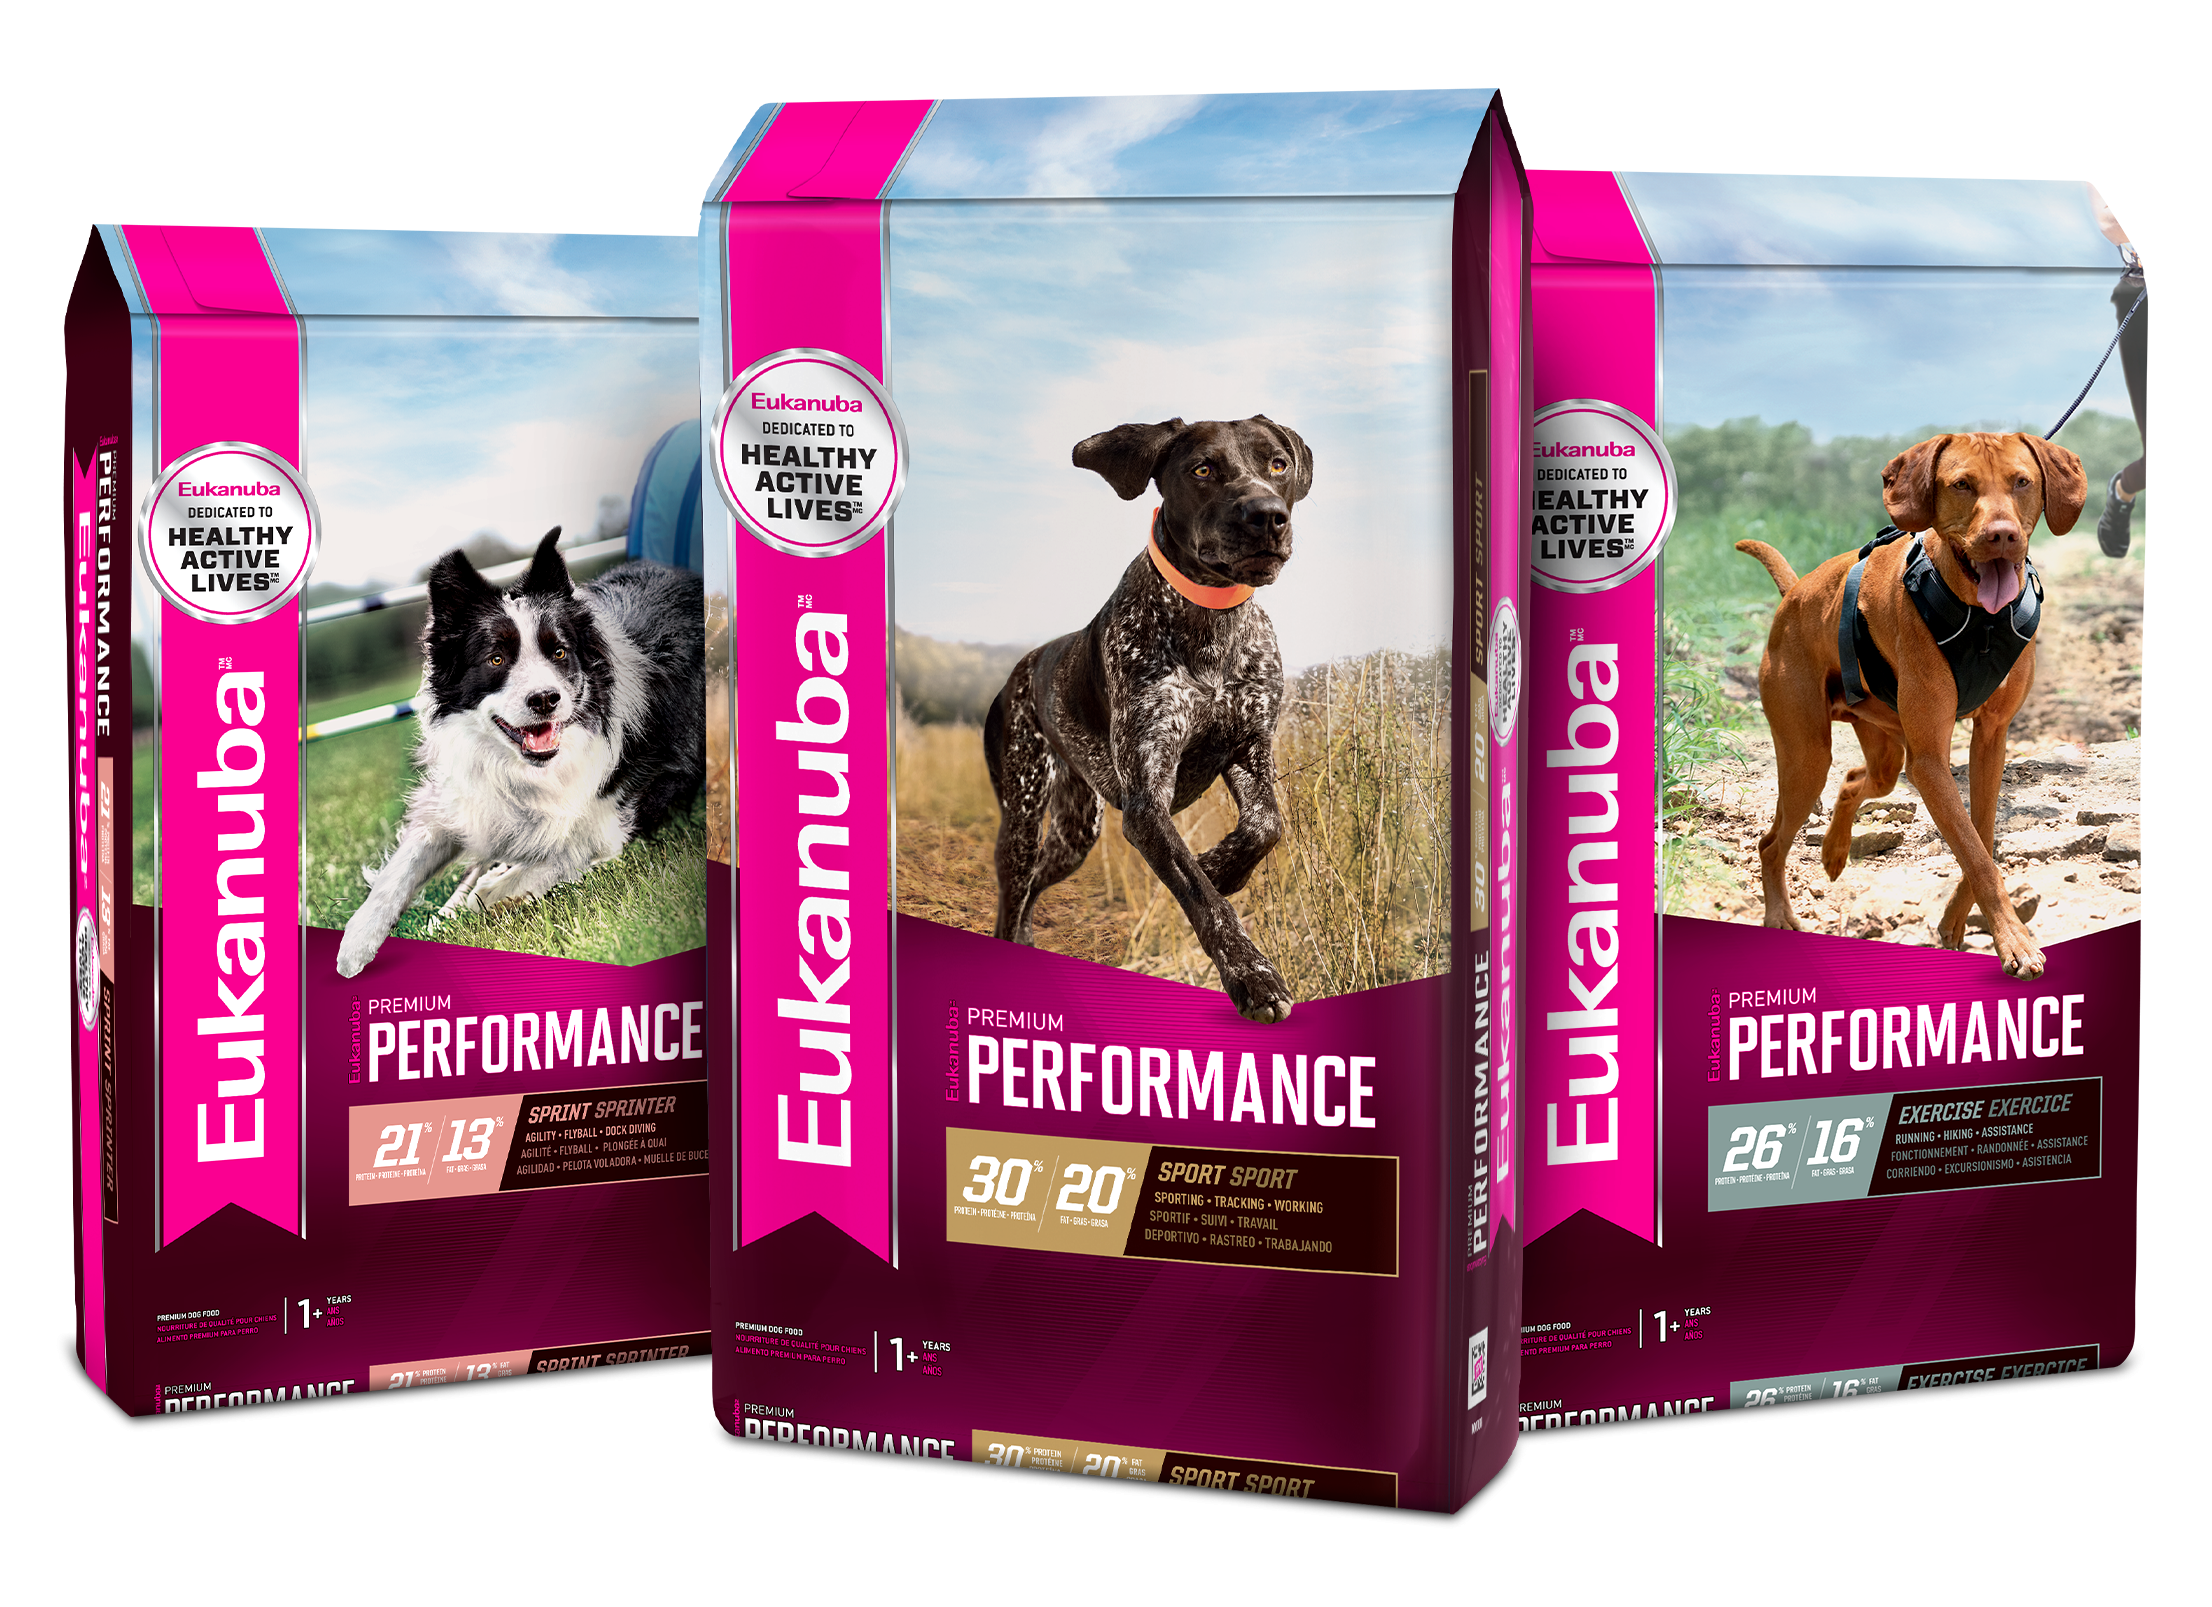 <p><strong>EUKANUBA Premium Performance Dog Food</strong></p><p>You can't forget about your four-legged friends this season, and a great gift for them is EUKANUBA. You can choose a nutrient level based on the activity for your dog, and every one of them supports their joints, brain function and building muscle. They even support post-exercise recovery after a long day of bank fishing. <a href=